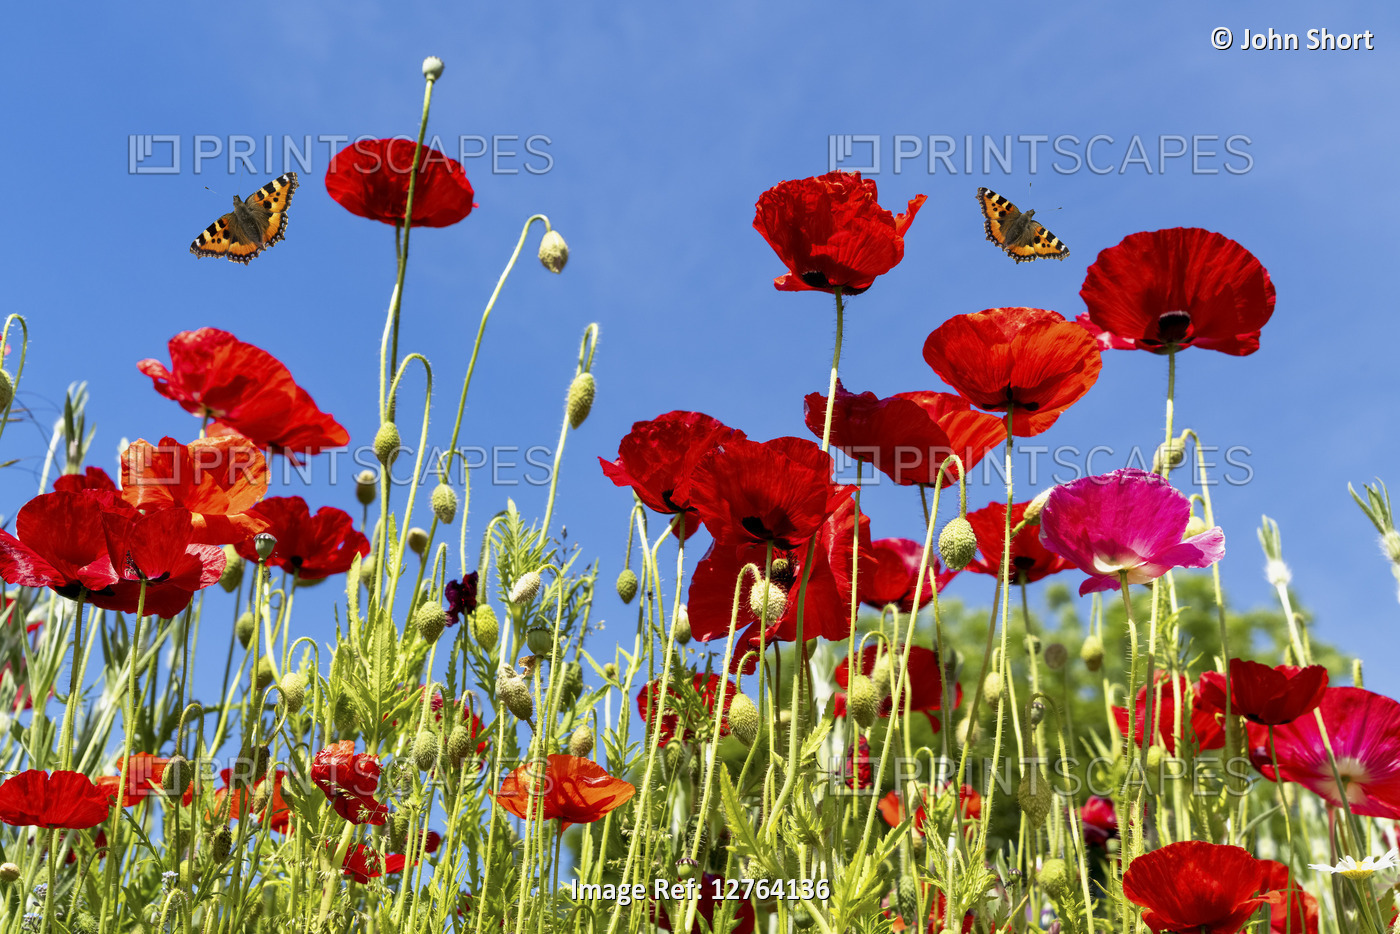 Butterflies flying over red poppies; Whitburn, Tyne and Wear, England